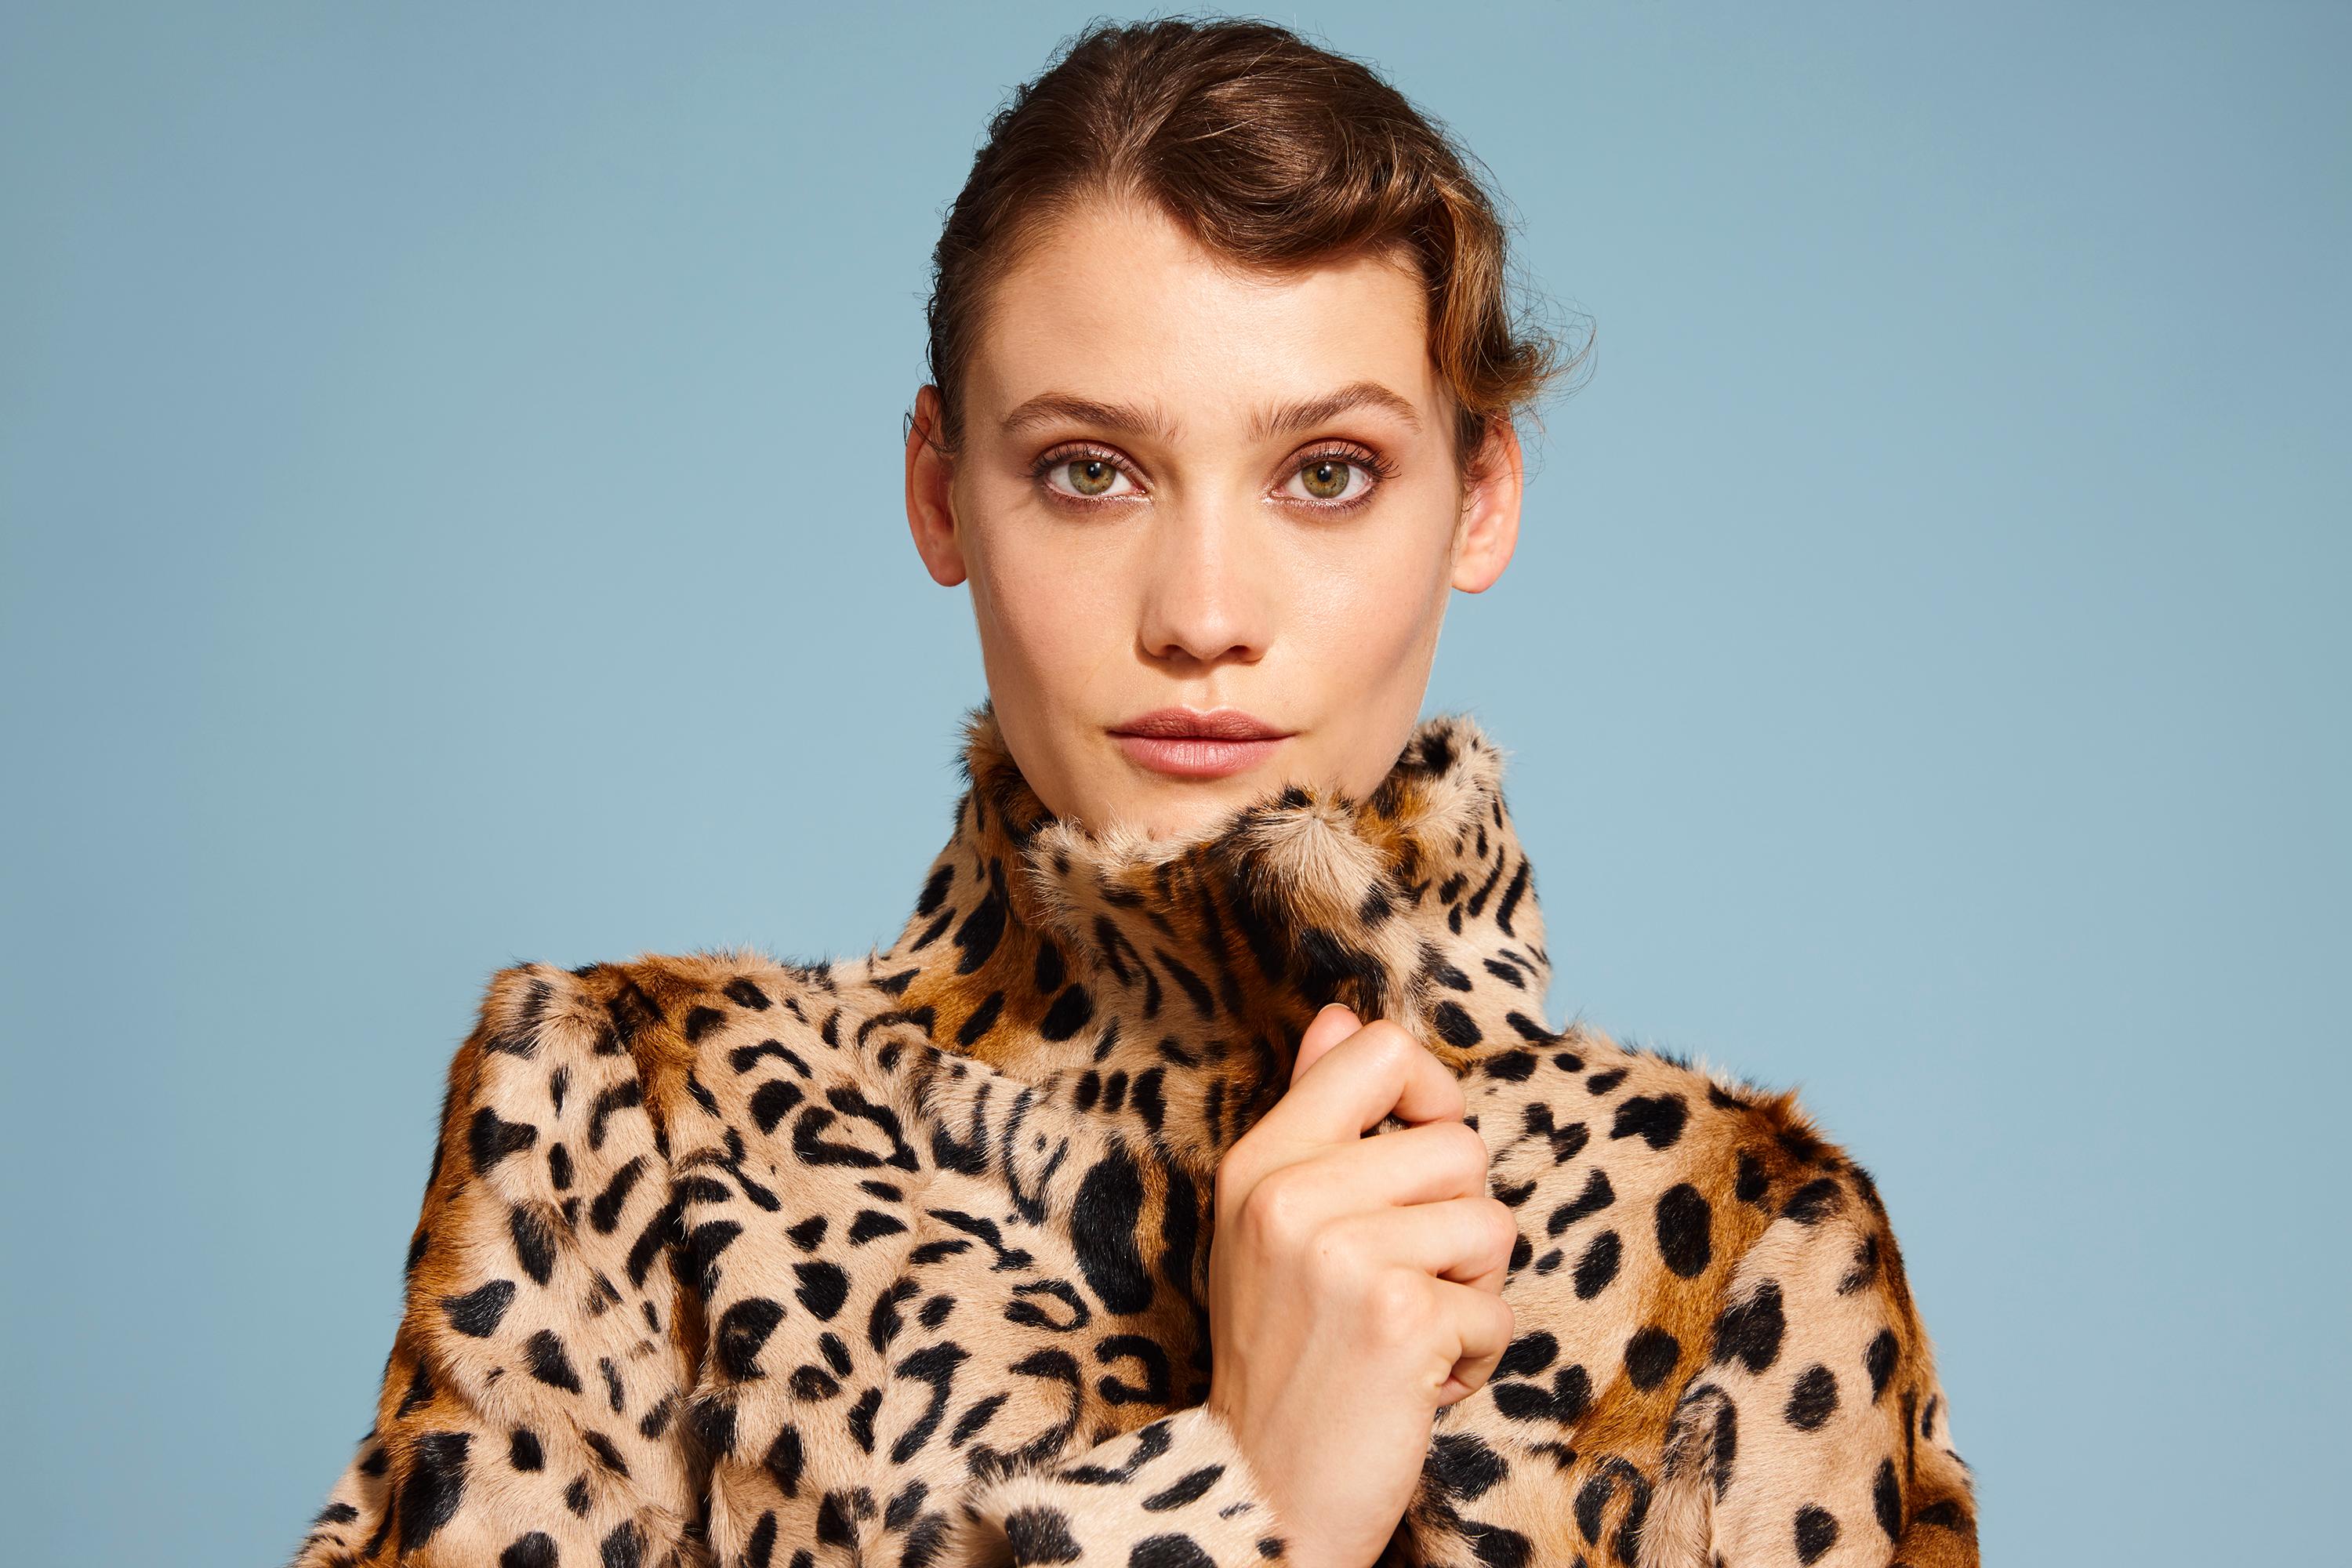 Verheyen London High Collar Leopard Print Coat Natural Goat Hair Fur Size uk 14

This Leopard print coat is Verheyen London’s classic staple for effortless style and glamour.
A coat for dressing up and down with jeans or a dress.

PRODUCT